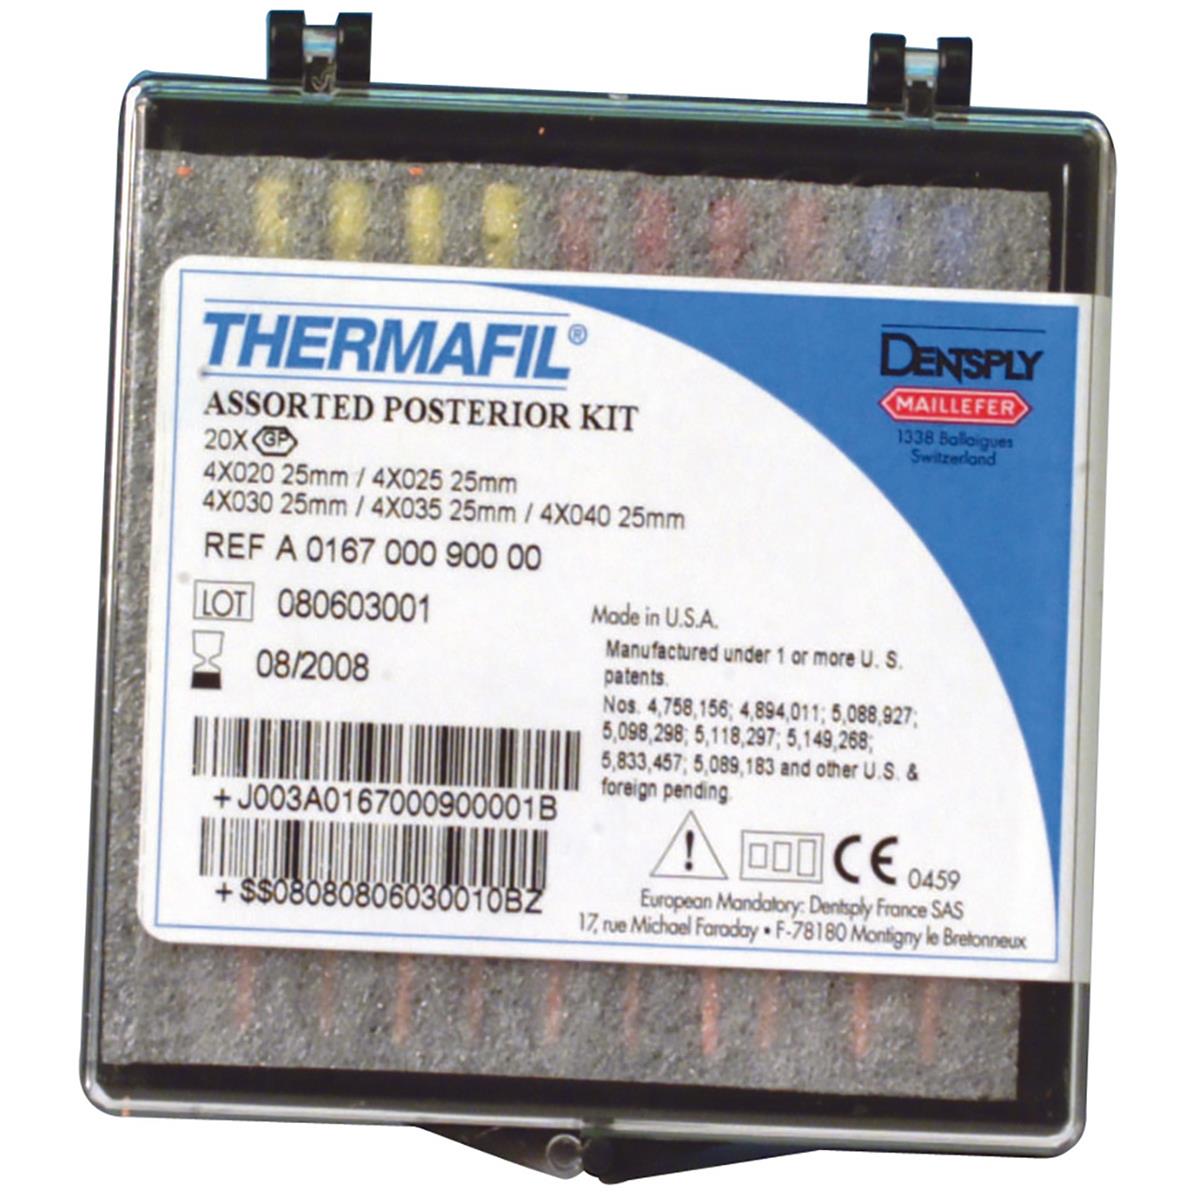 Thermafill Posterior Kit Assorted